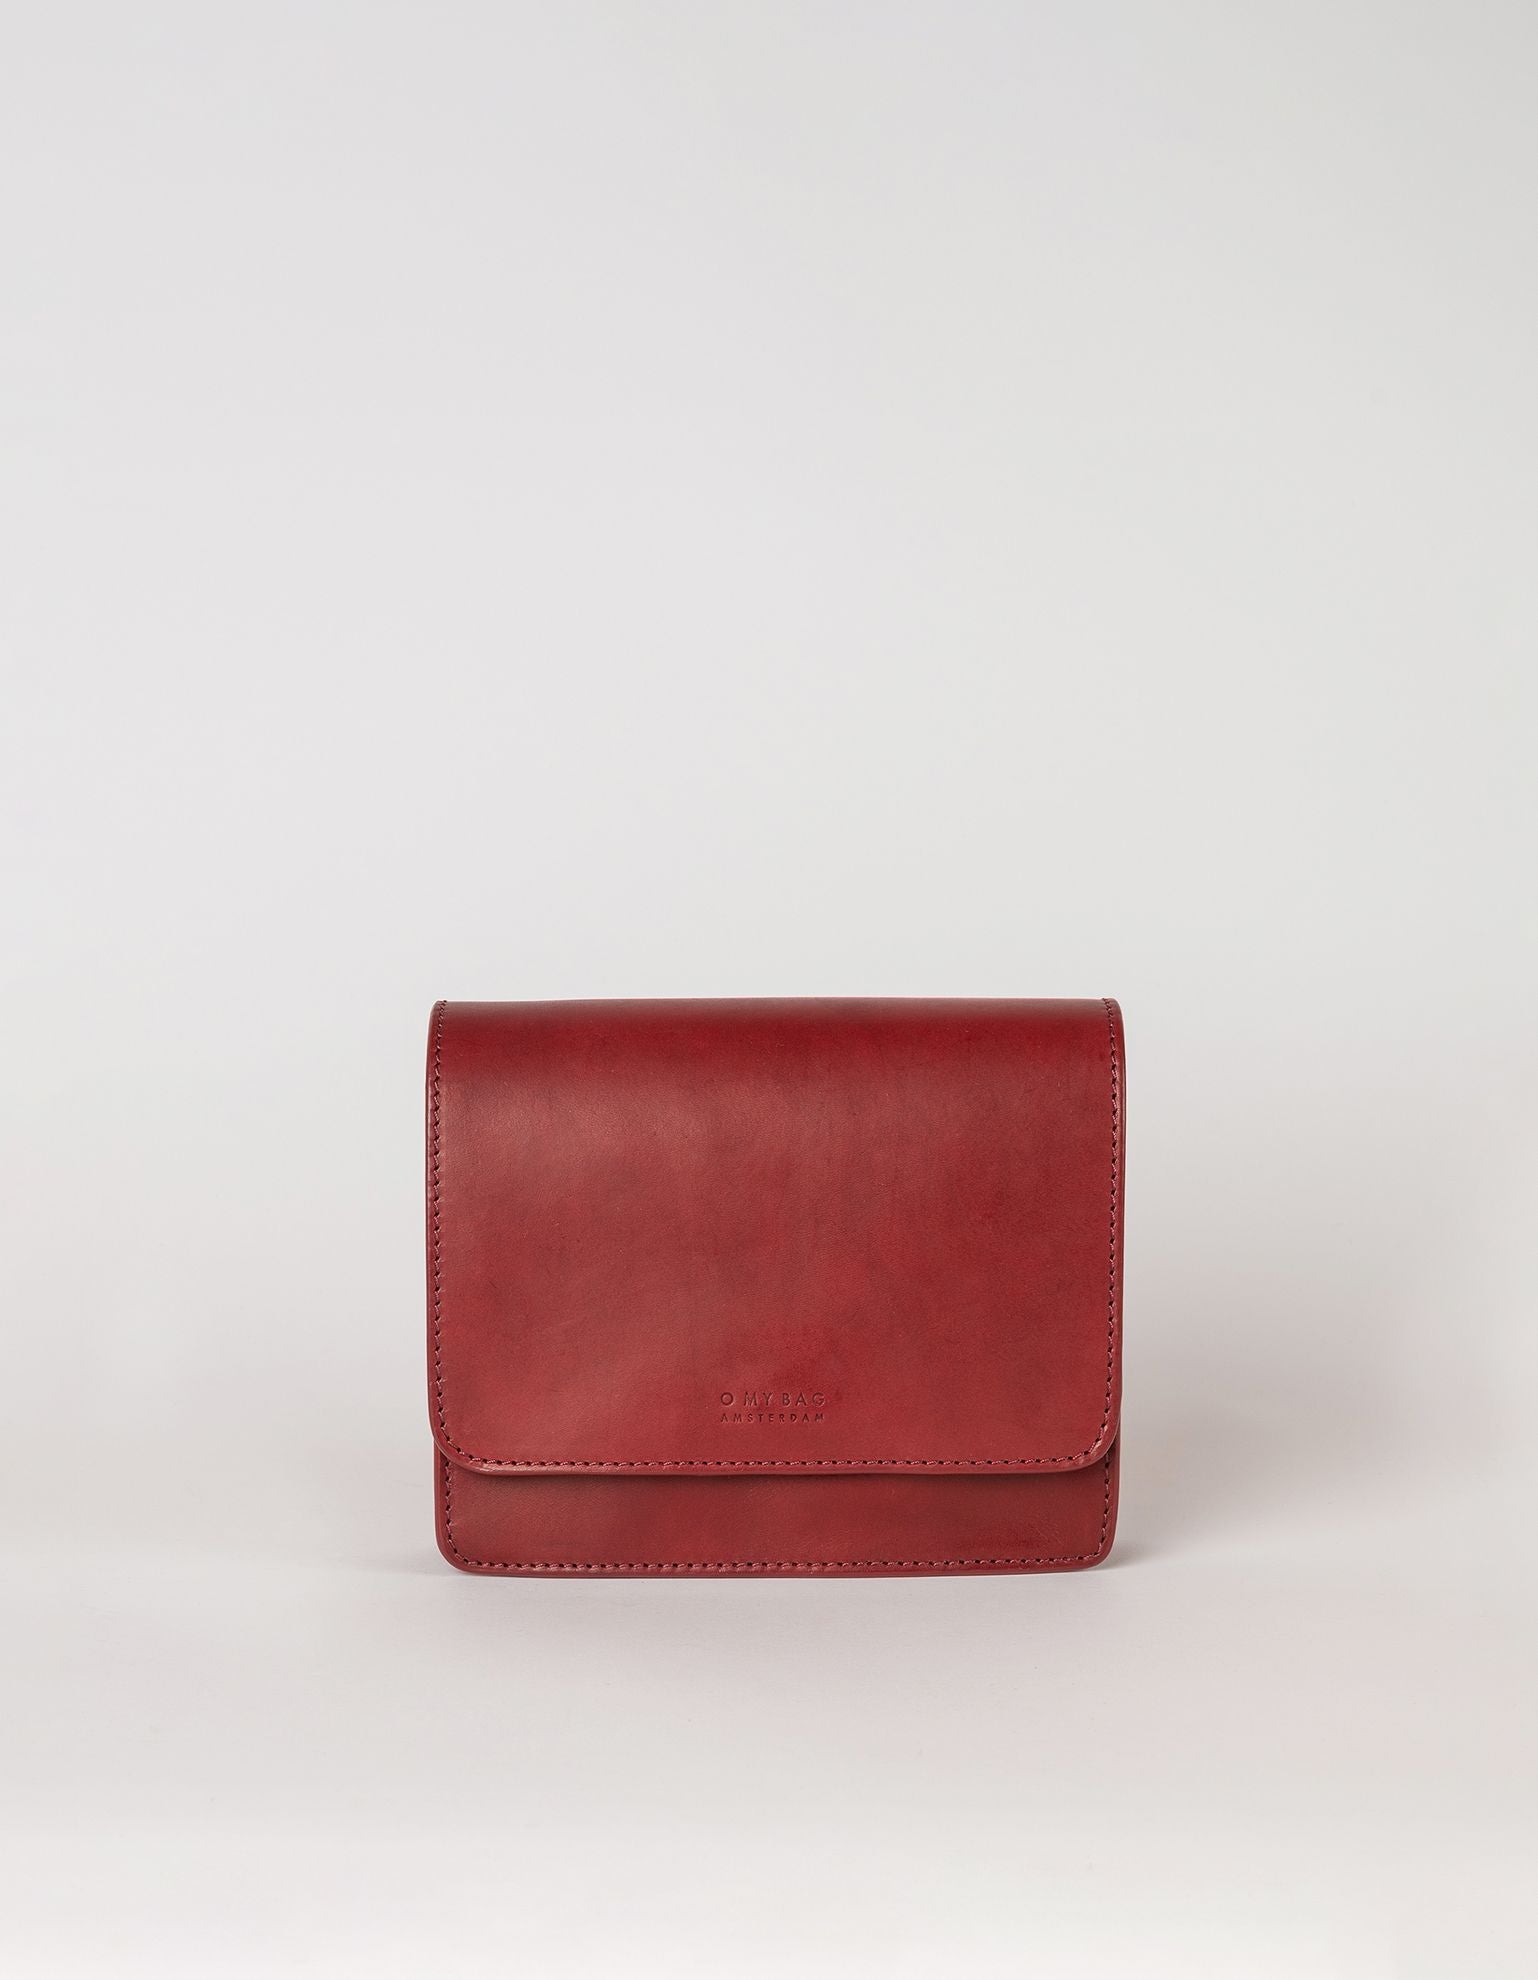 Audrey mini ruby classic leather. front product image